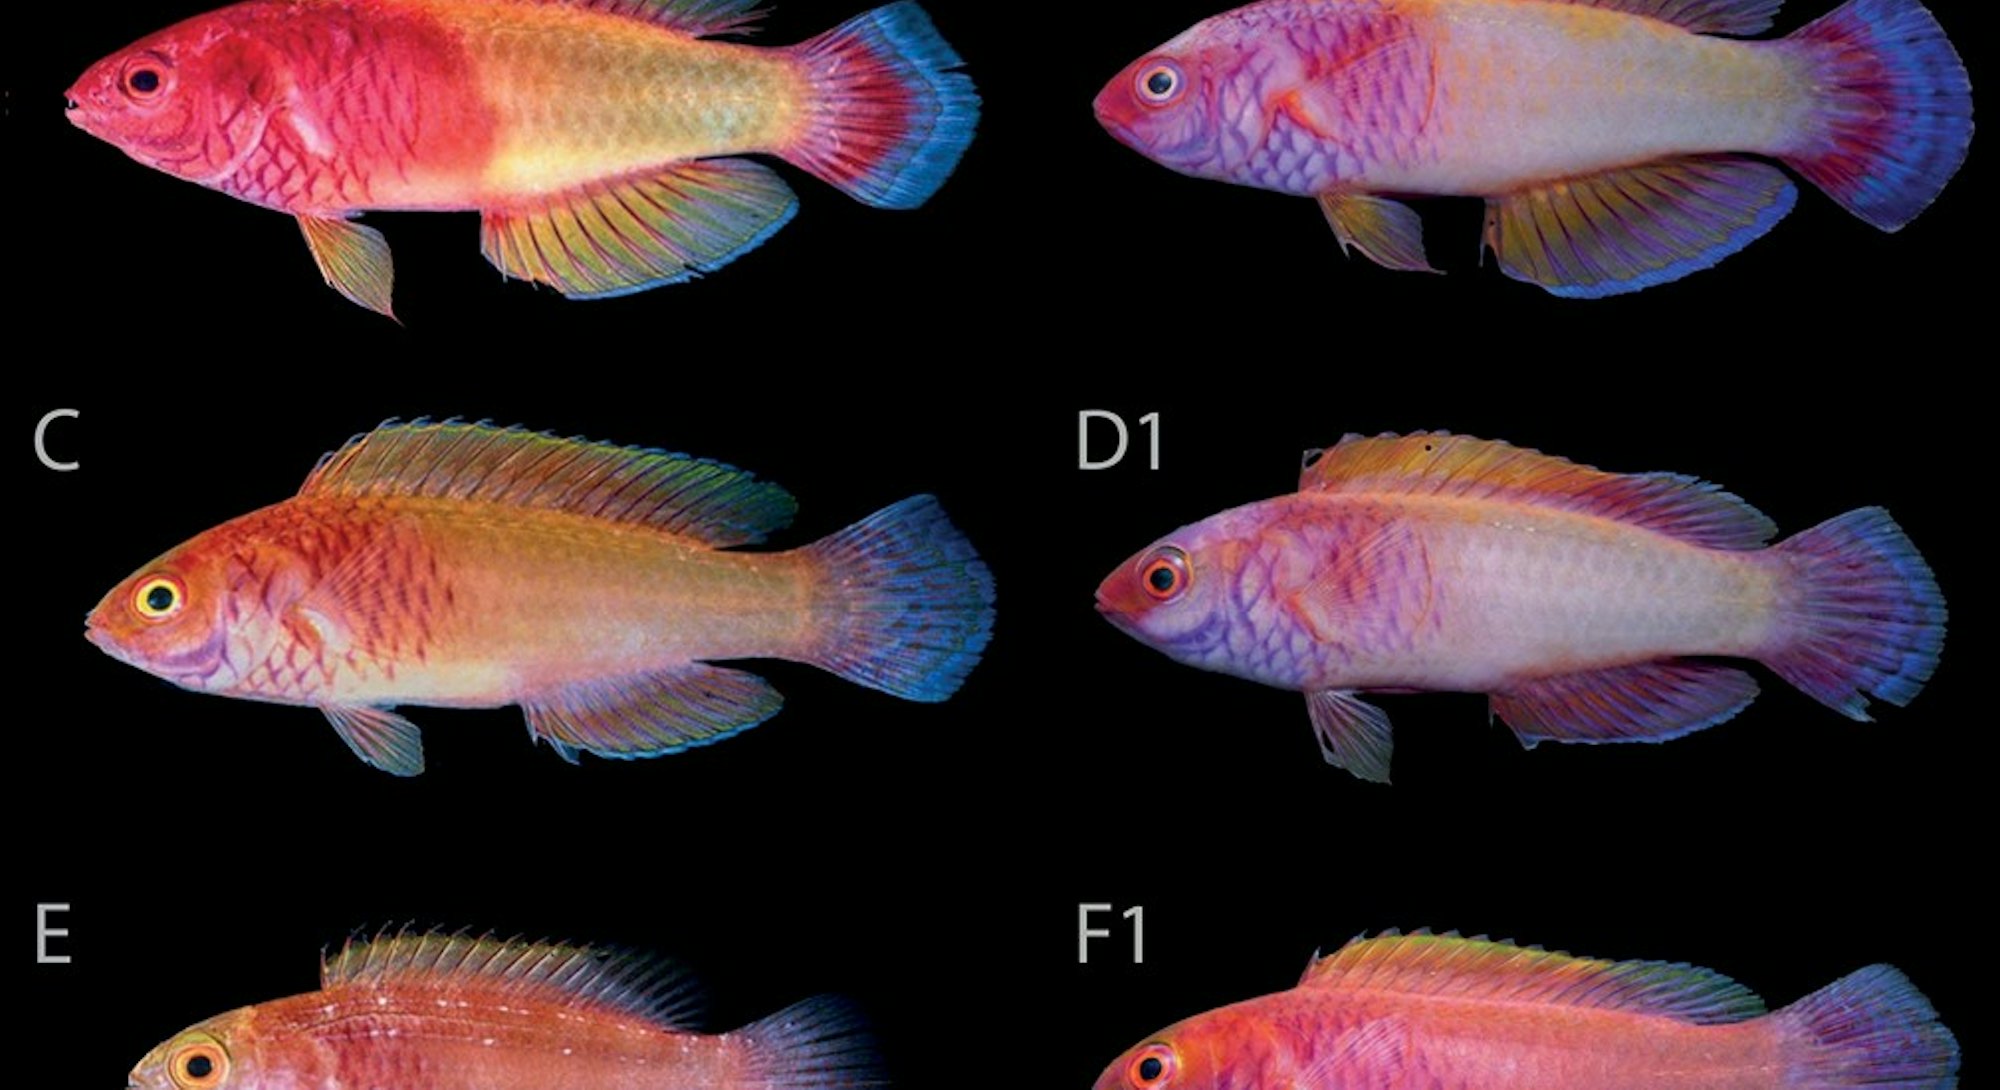 Six rainbow fishes belonging to the new species